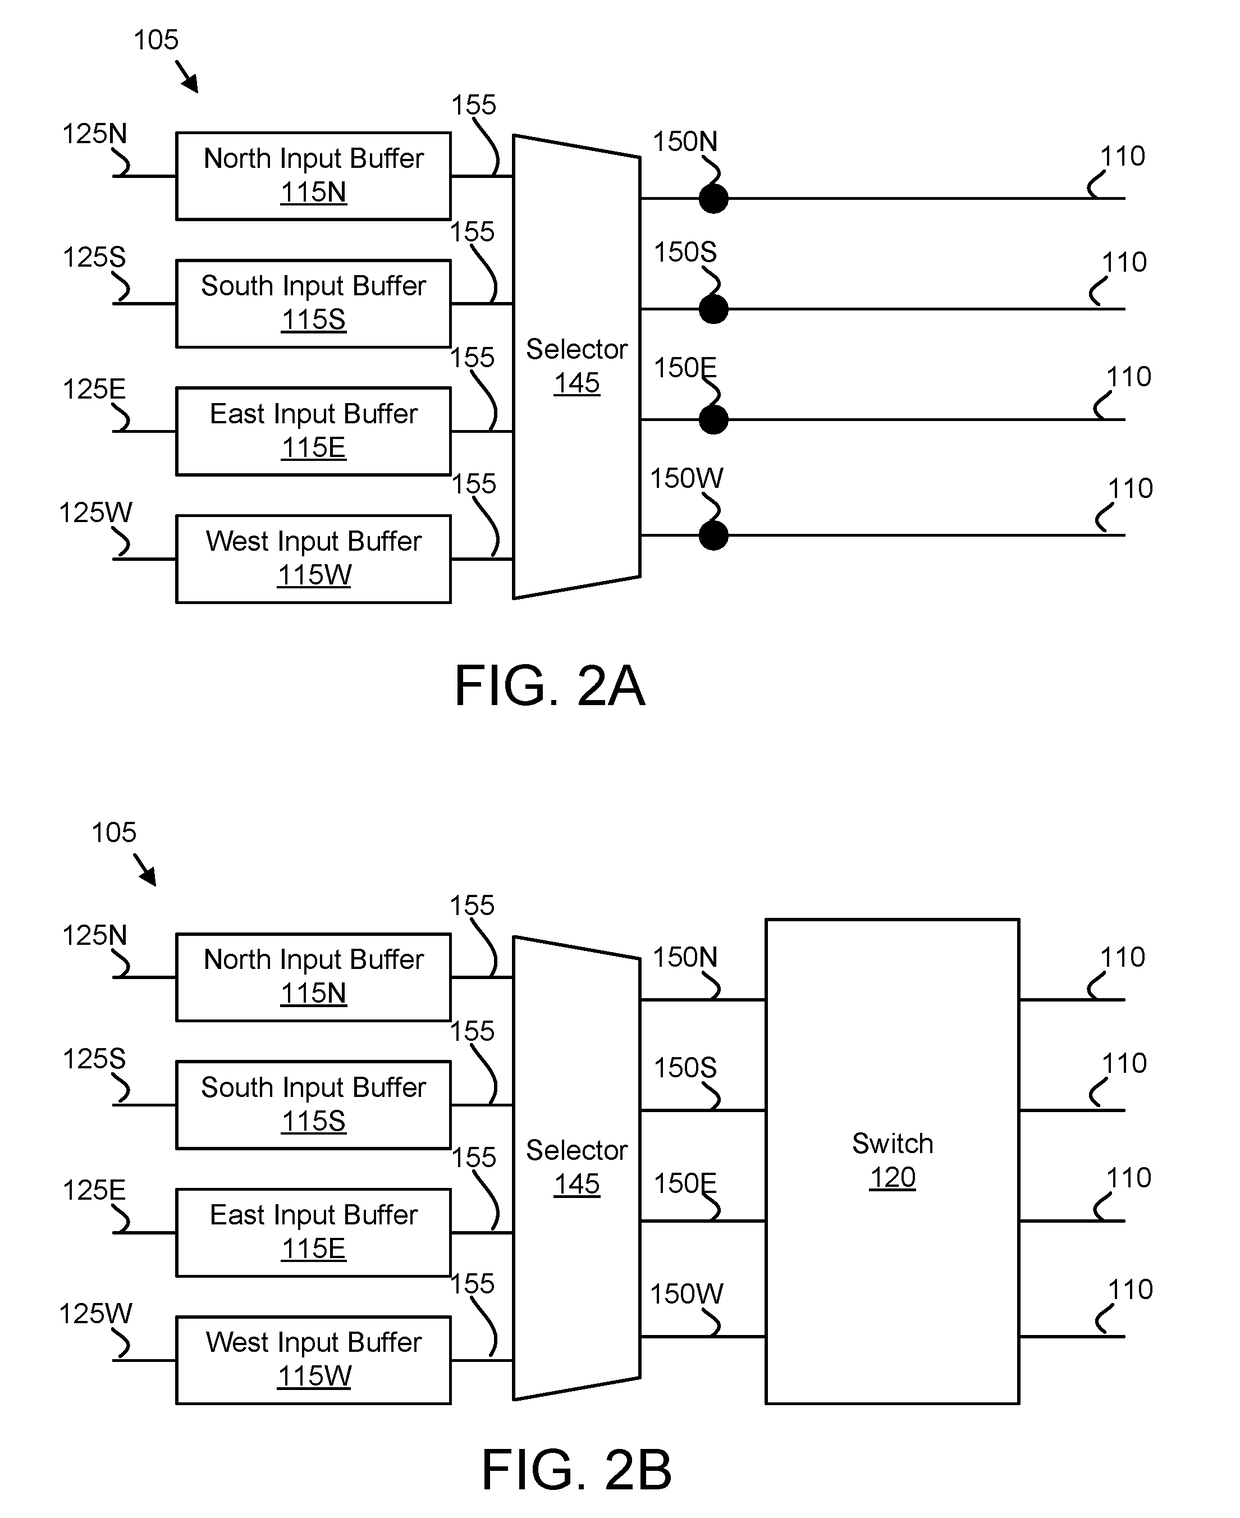 Hot carrier injection tolerant network on chip router architecture